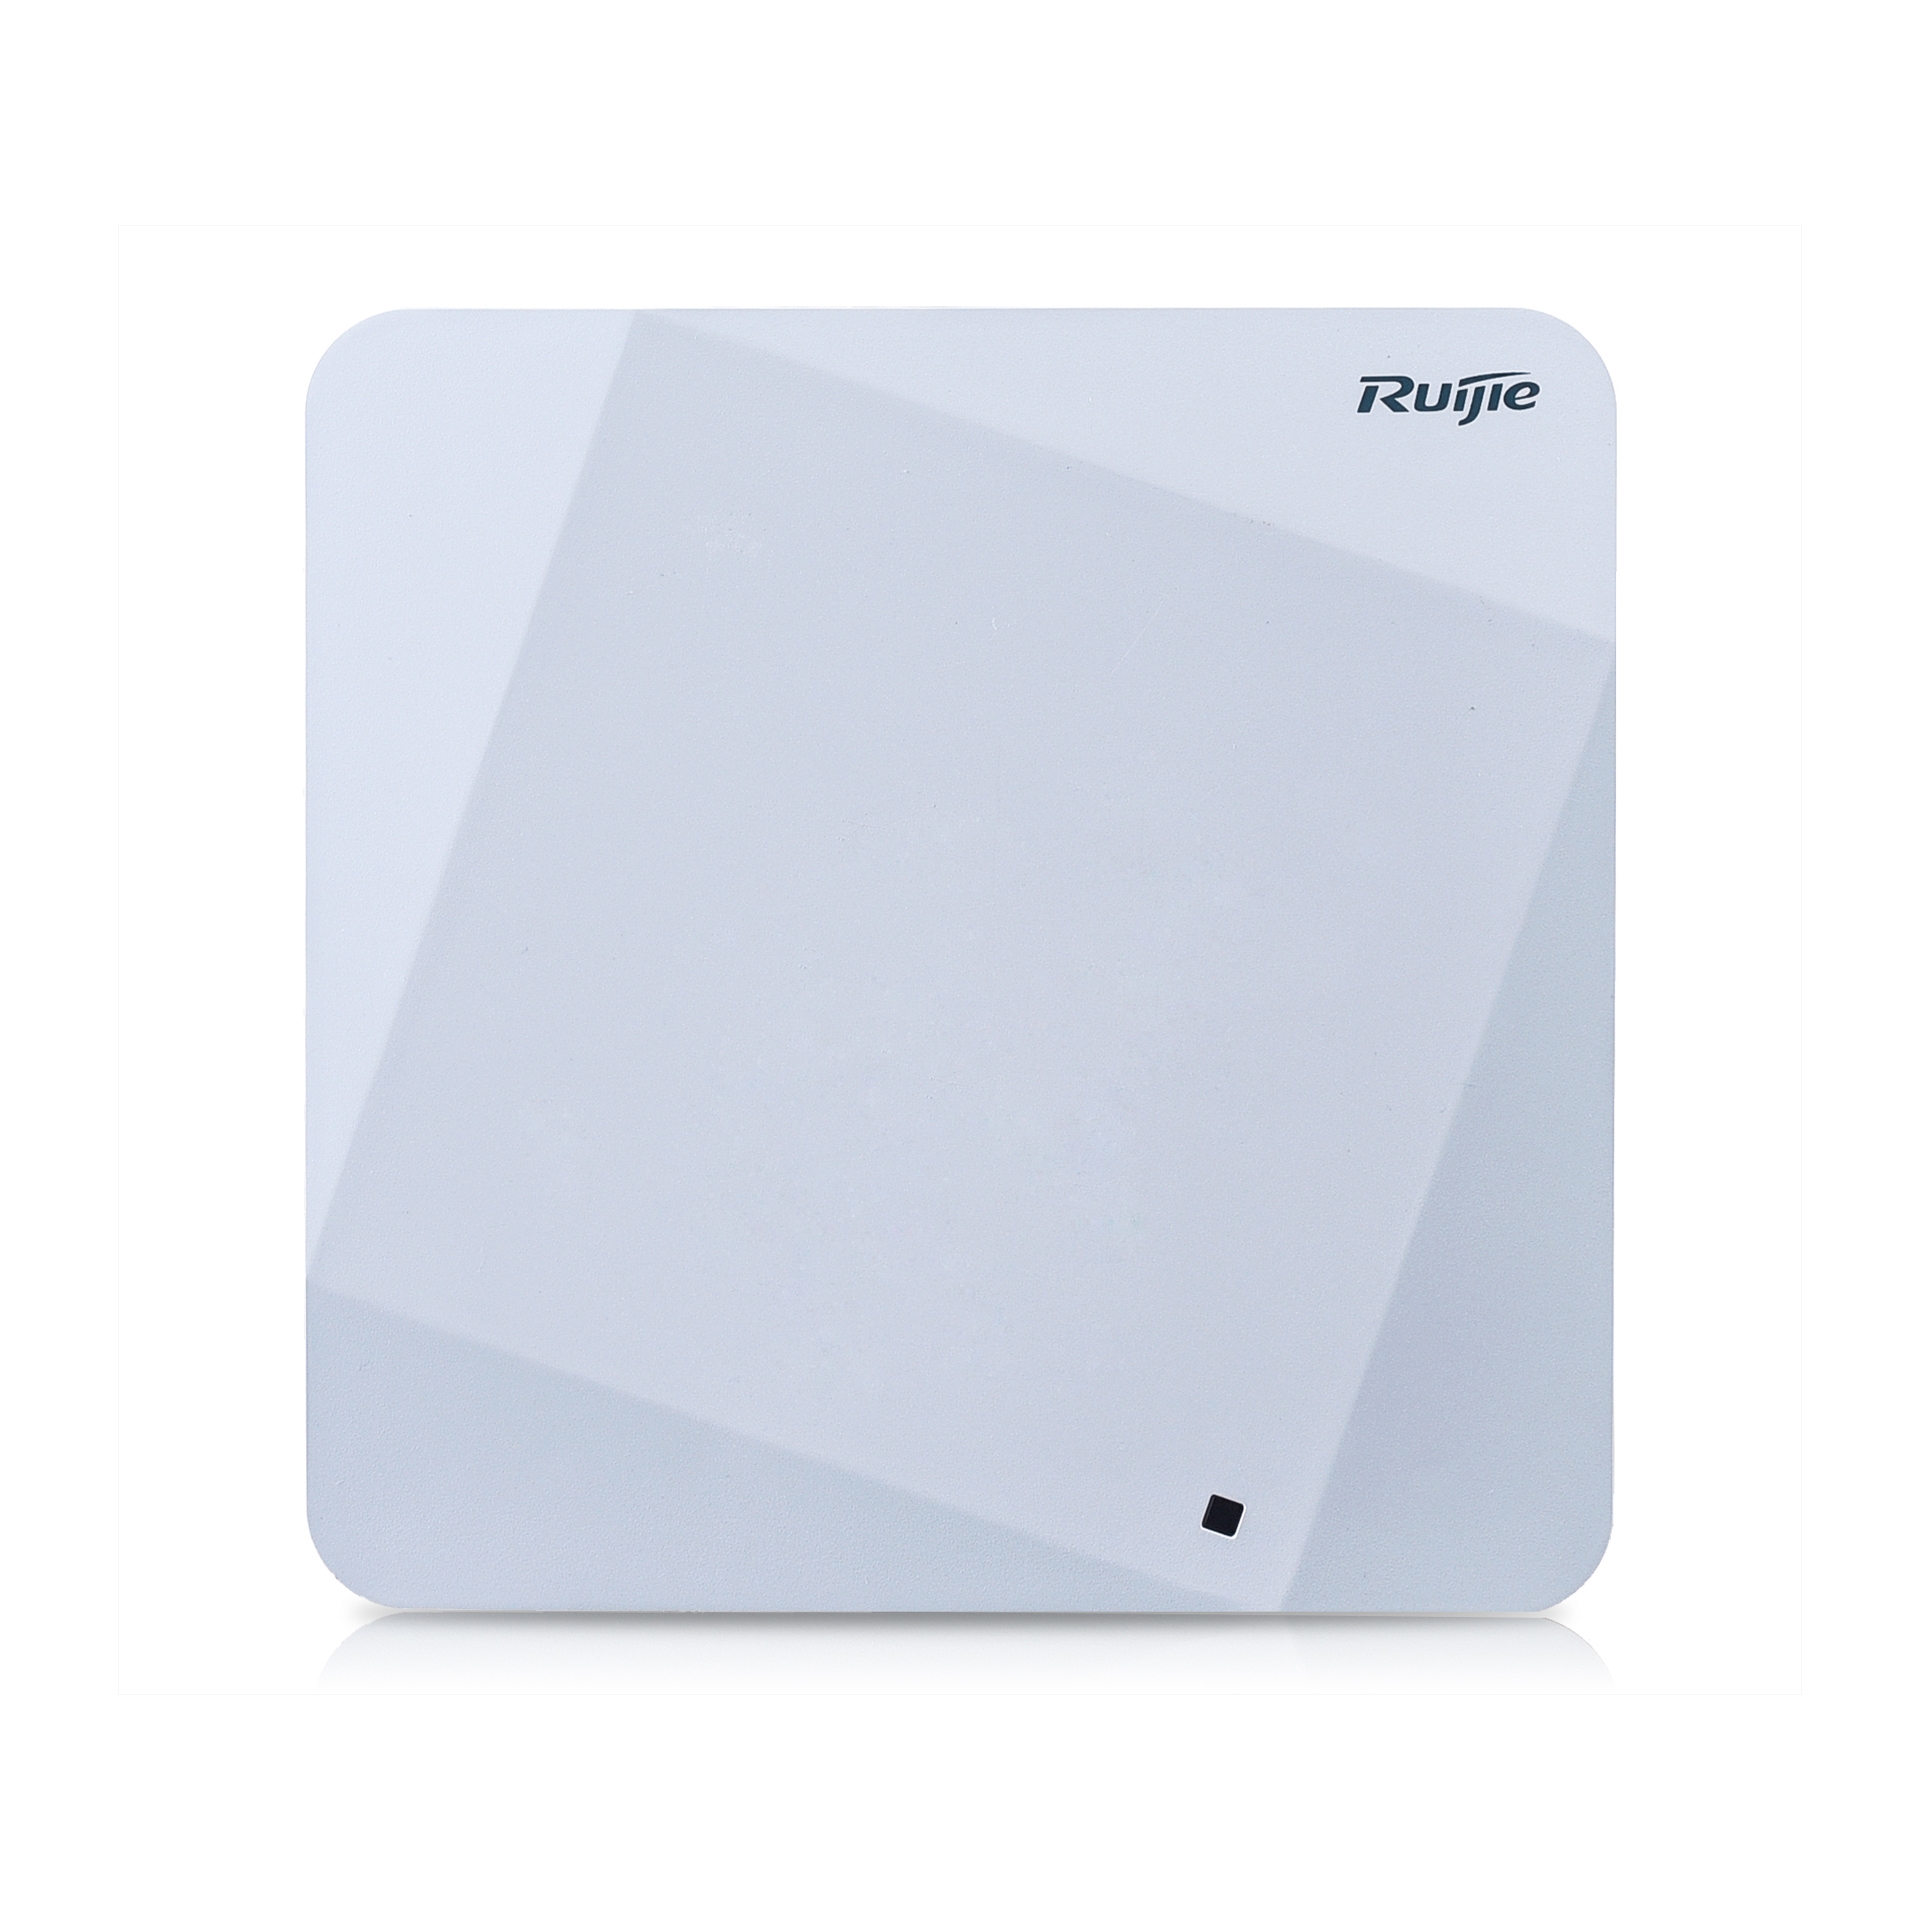 RUIJIE RG-AP710 1167MBPS 1PORT 2x2MIMO 2.4 GHZ & 5 GHZ INDOOR ACCESS POINT